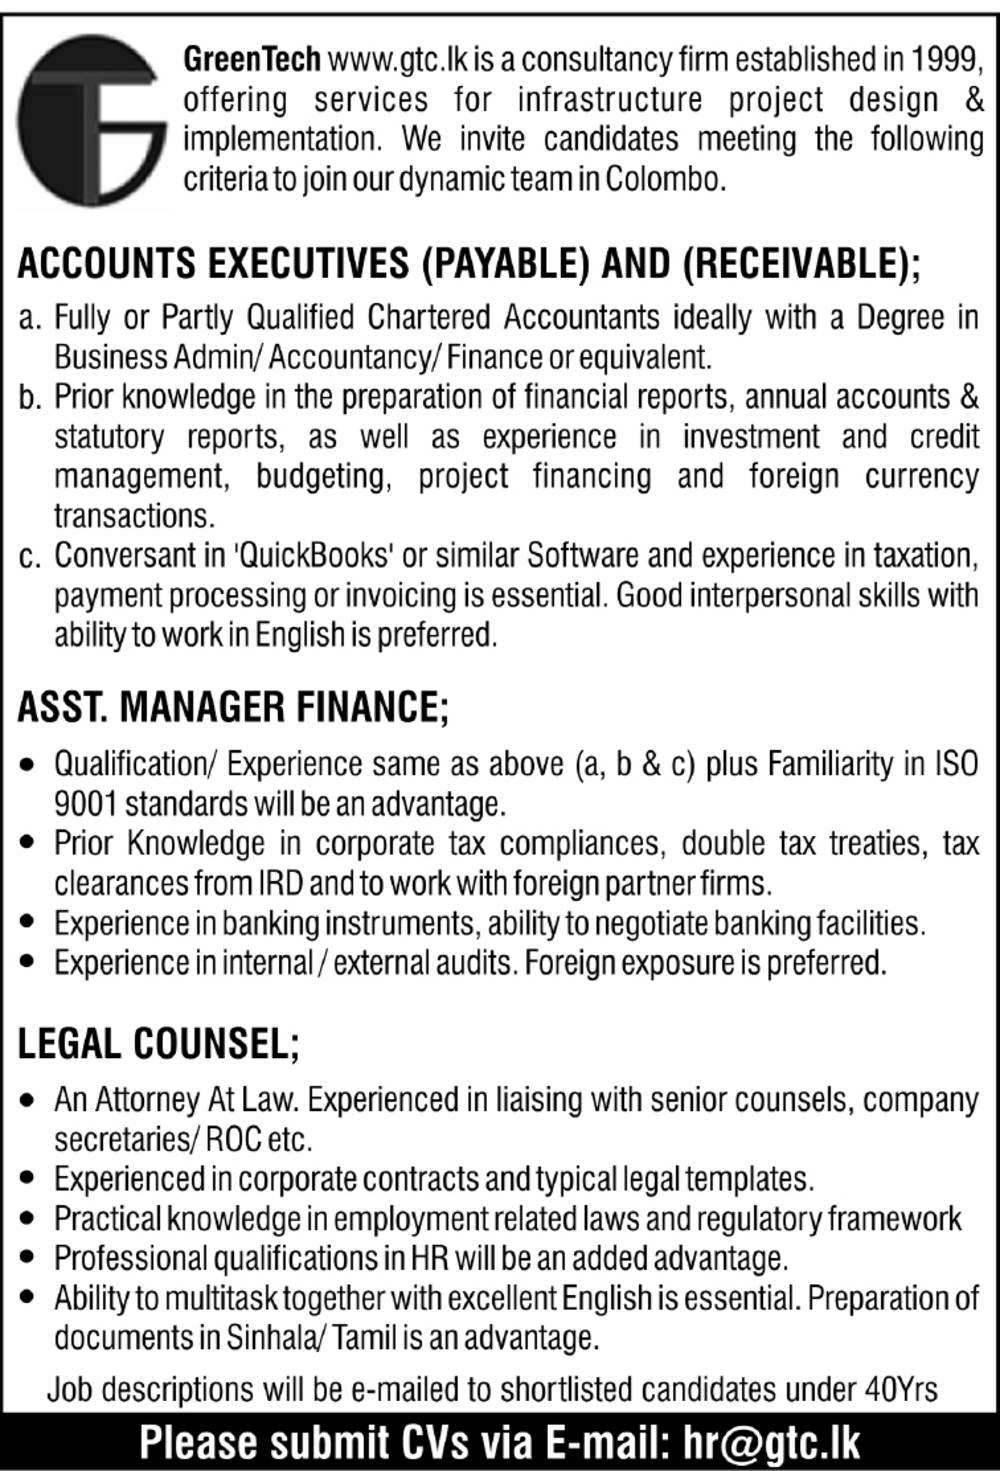 You are currently viewing Accountant Executives / Assist Manager / Legal Counsel